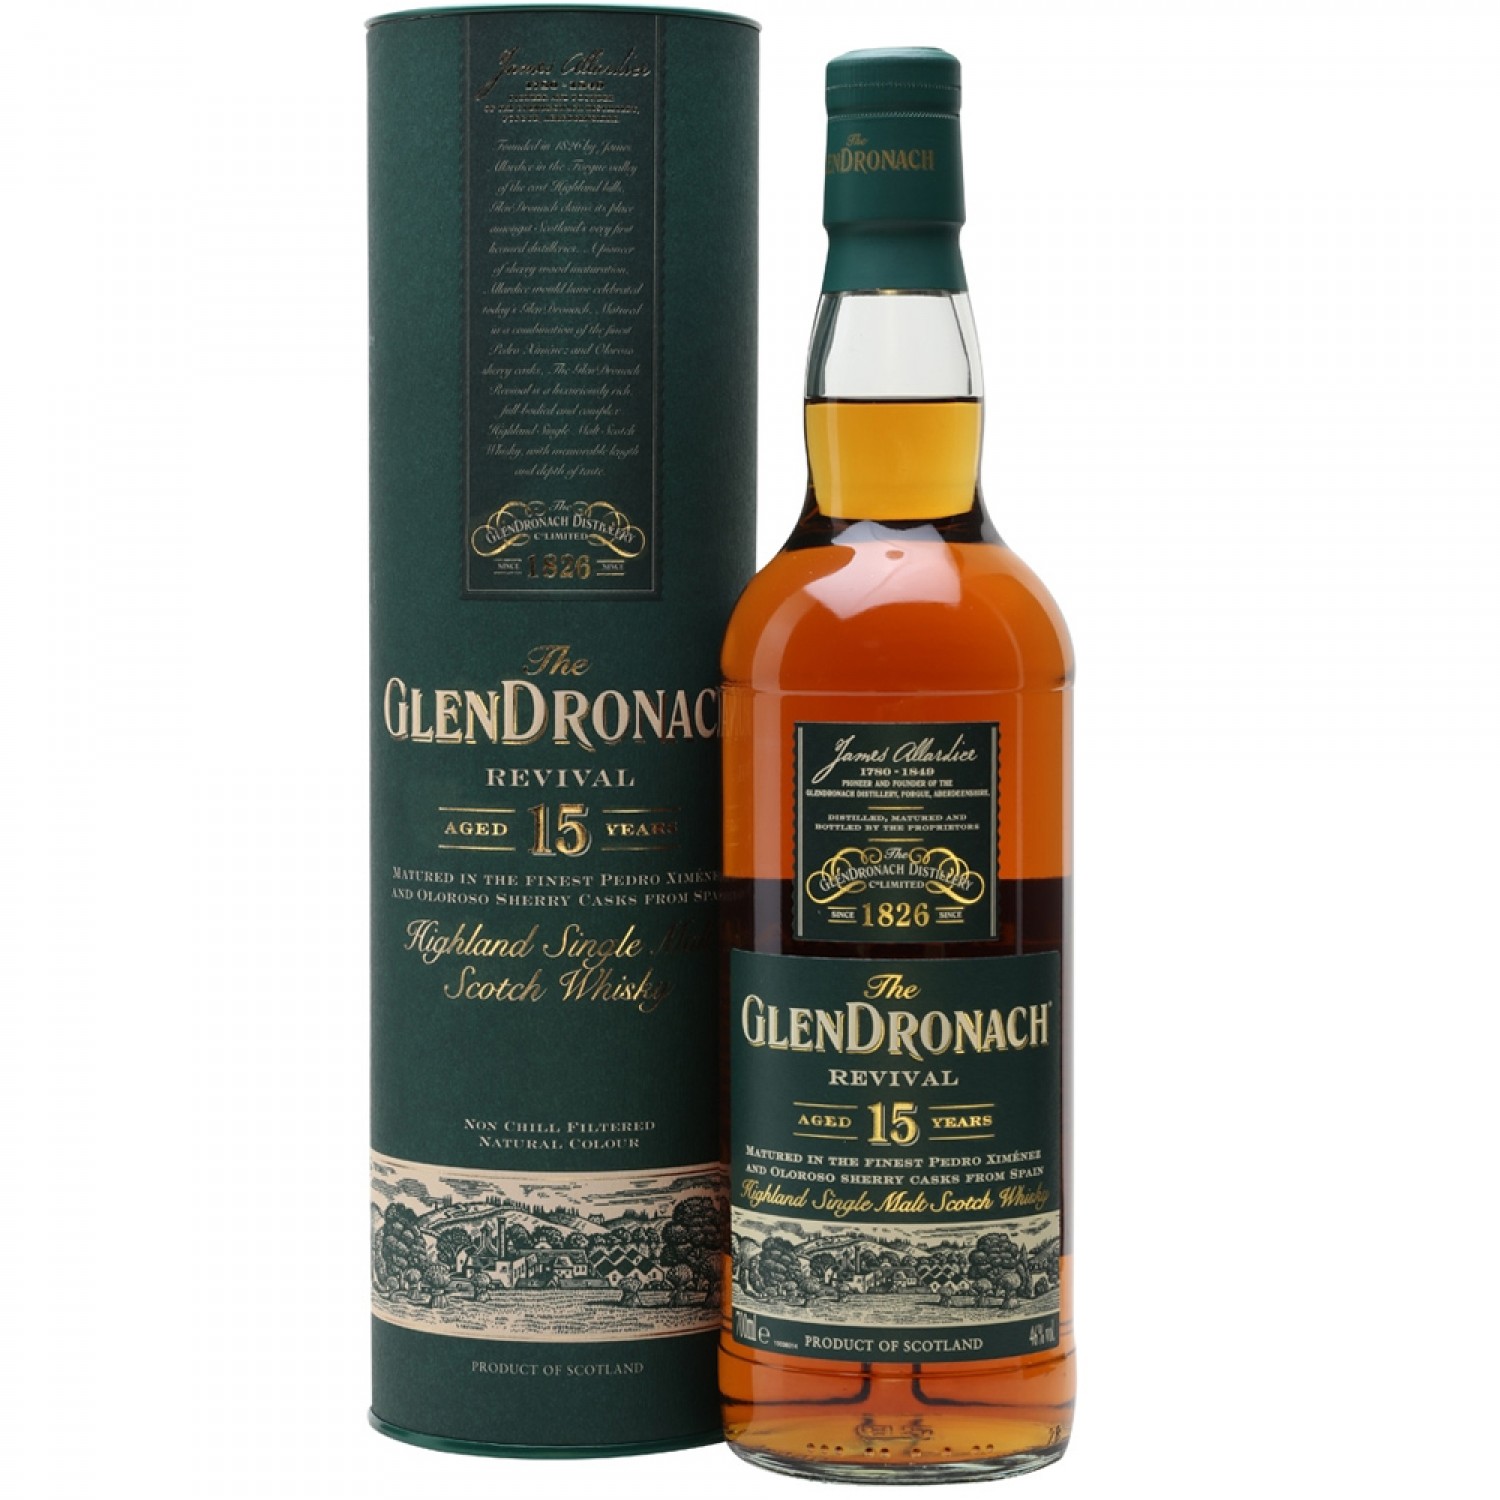 The GlenDronach Revival Aged 15 Years 700ml